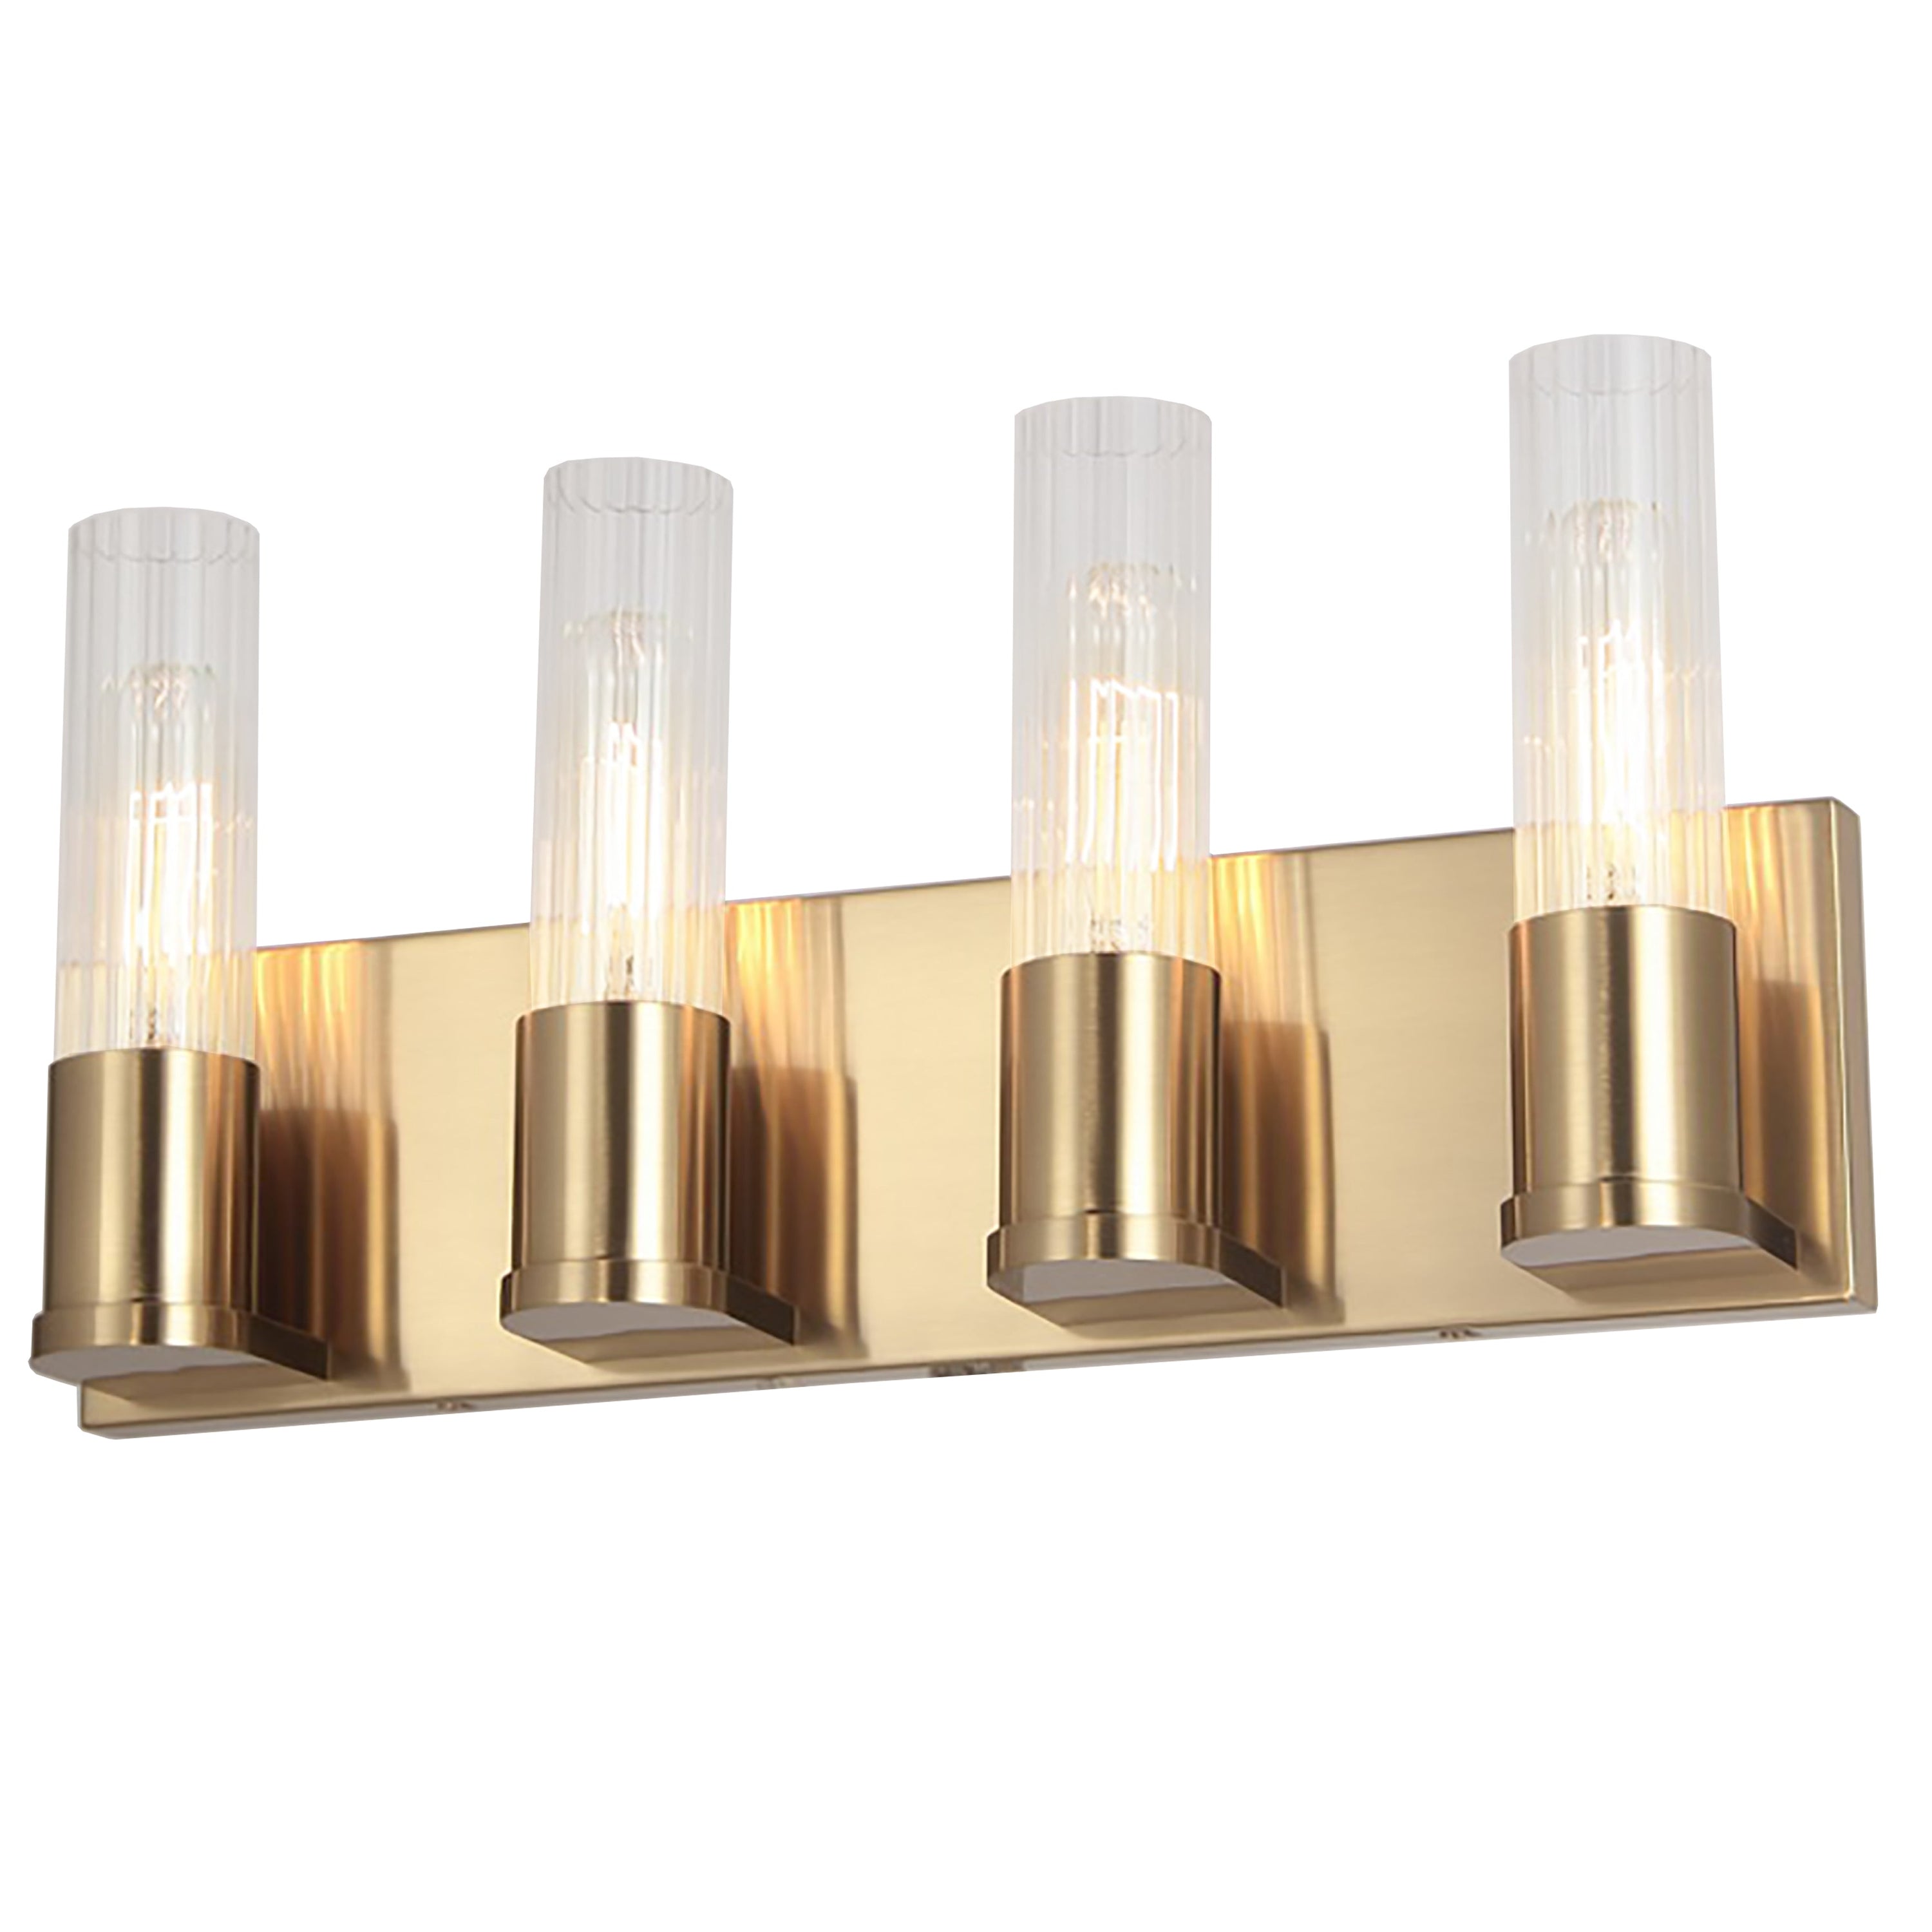 Dainolite Tube - TBE-174W-AGB - 4 Light Vanity Fixture, Aged Brass w/ Clear Fluted Glass - Aged Brass